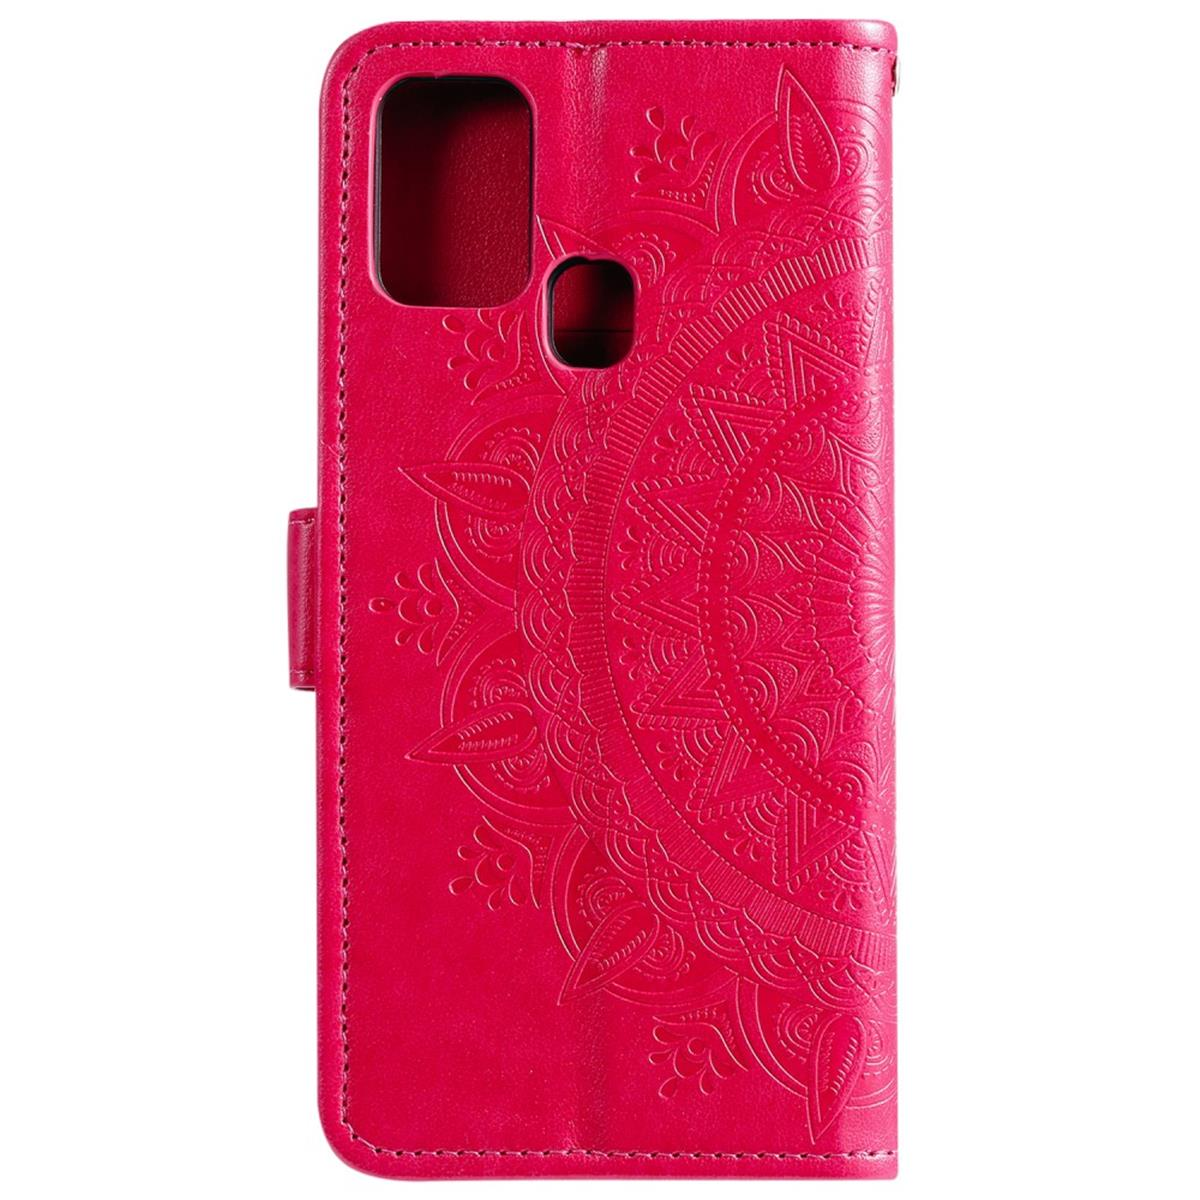 COVERKINGZ Klapphülle mit Mandala Muster, Galaxy M21/M30s, Samsung, Bookcover, Pink